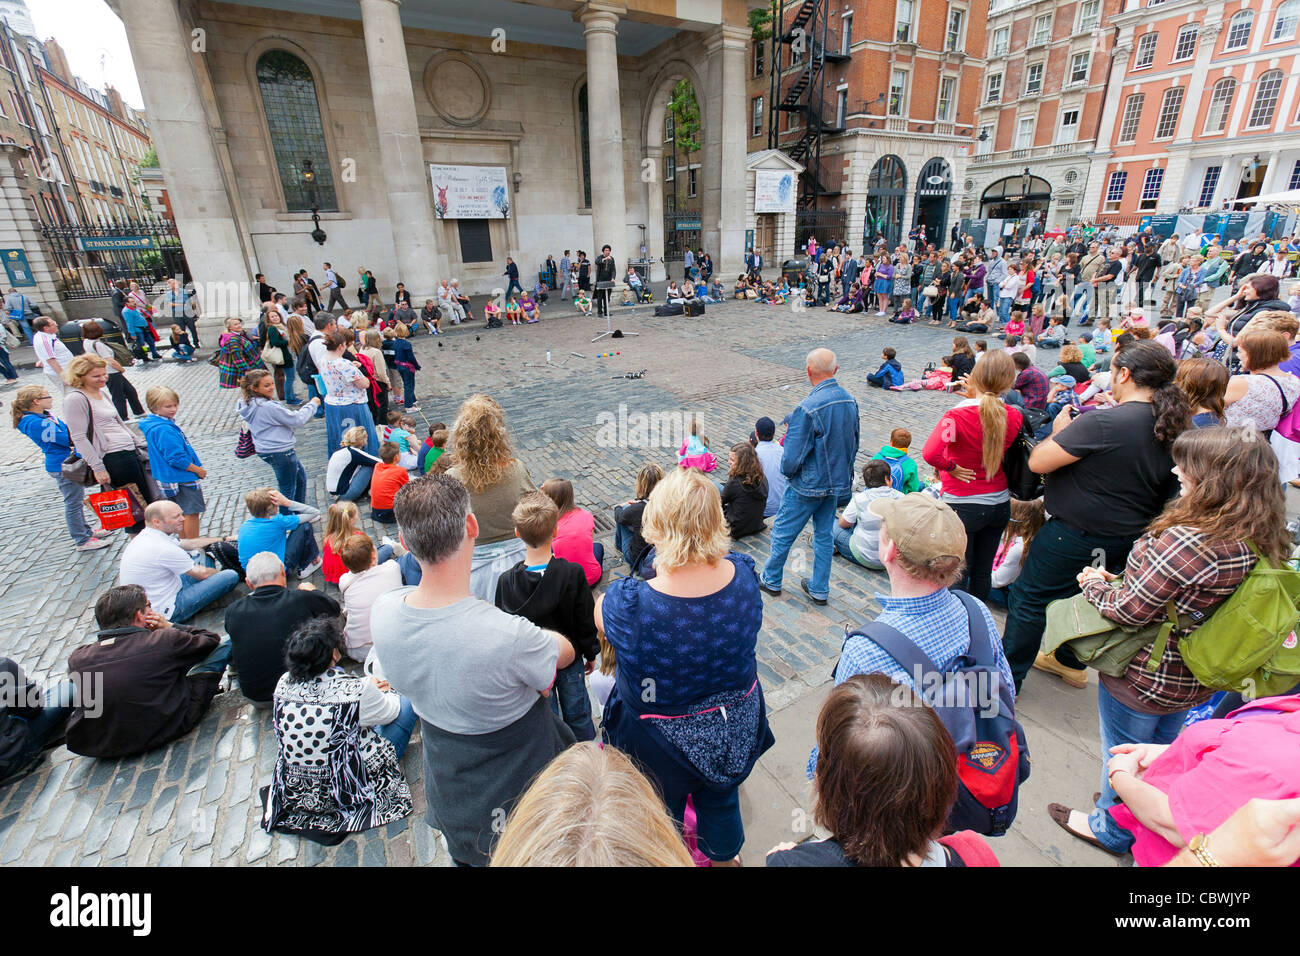 Tourists, shoppers and a street performer at Covent Garden, London, England. Stock Photo